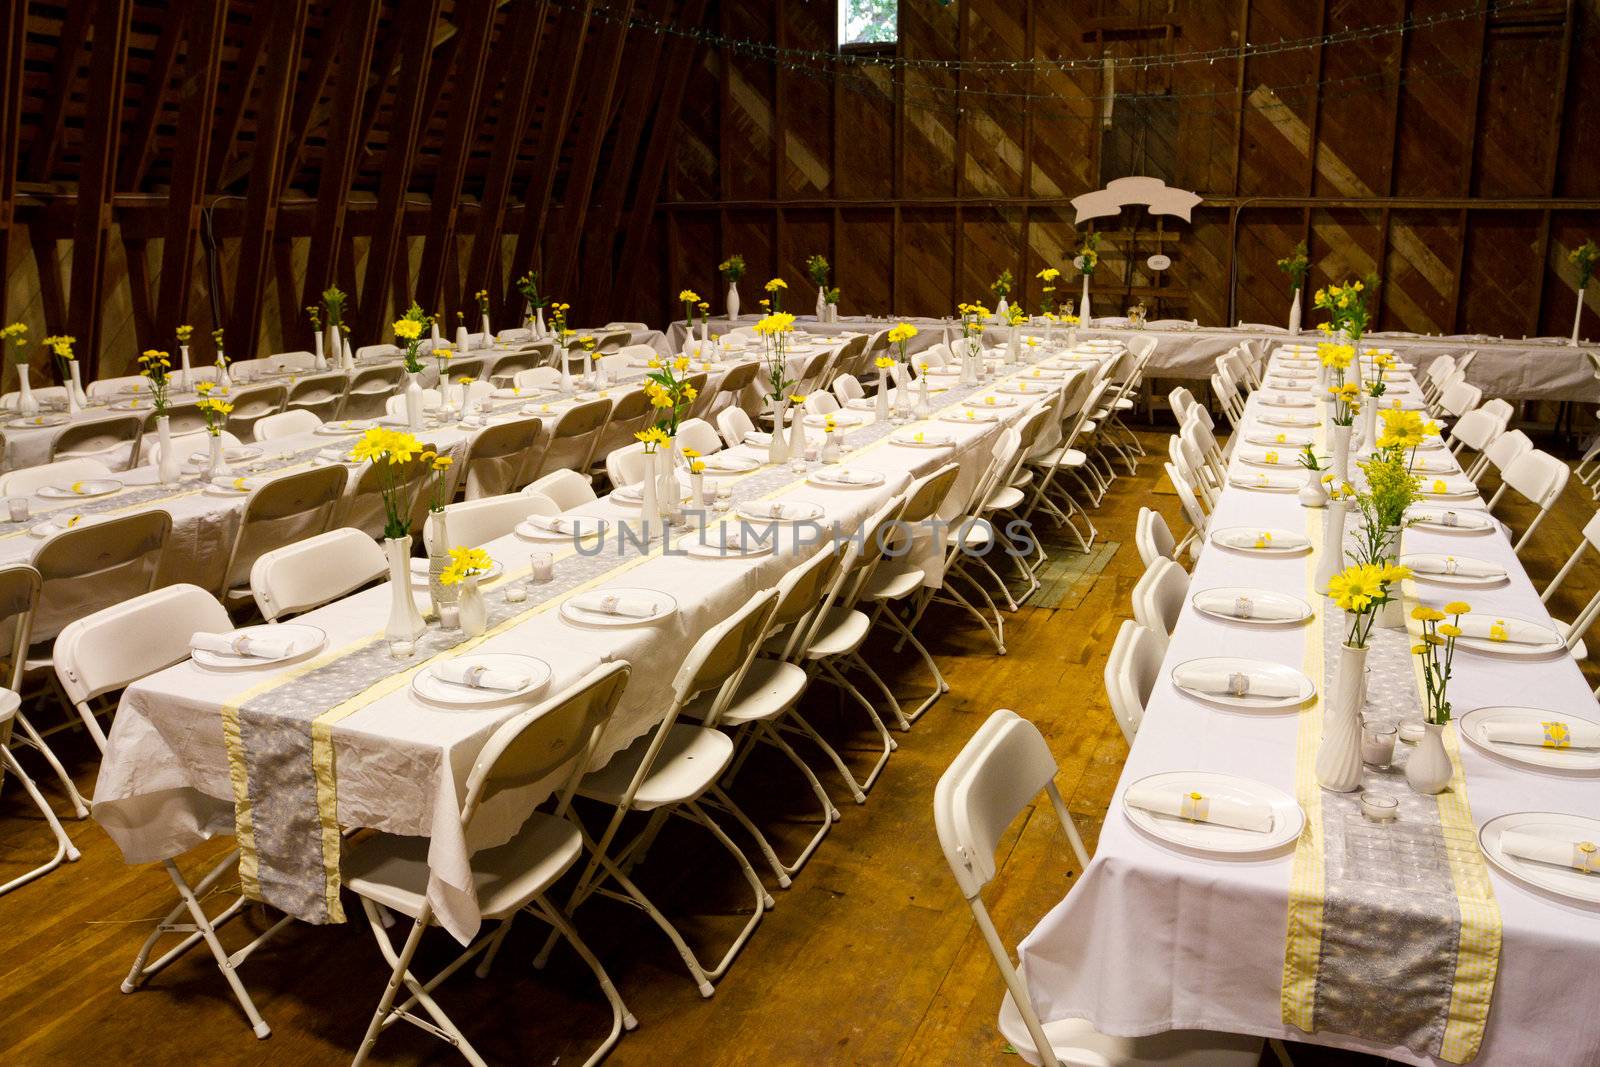 Tables are set up in an old barn for a wedding reception including dinner. These rows of tables are ready to seta and serve plenty of guests at this elegant diy wedding in the country.